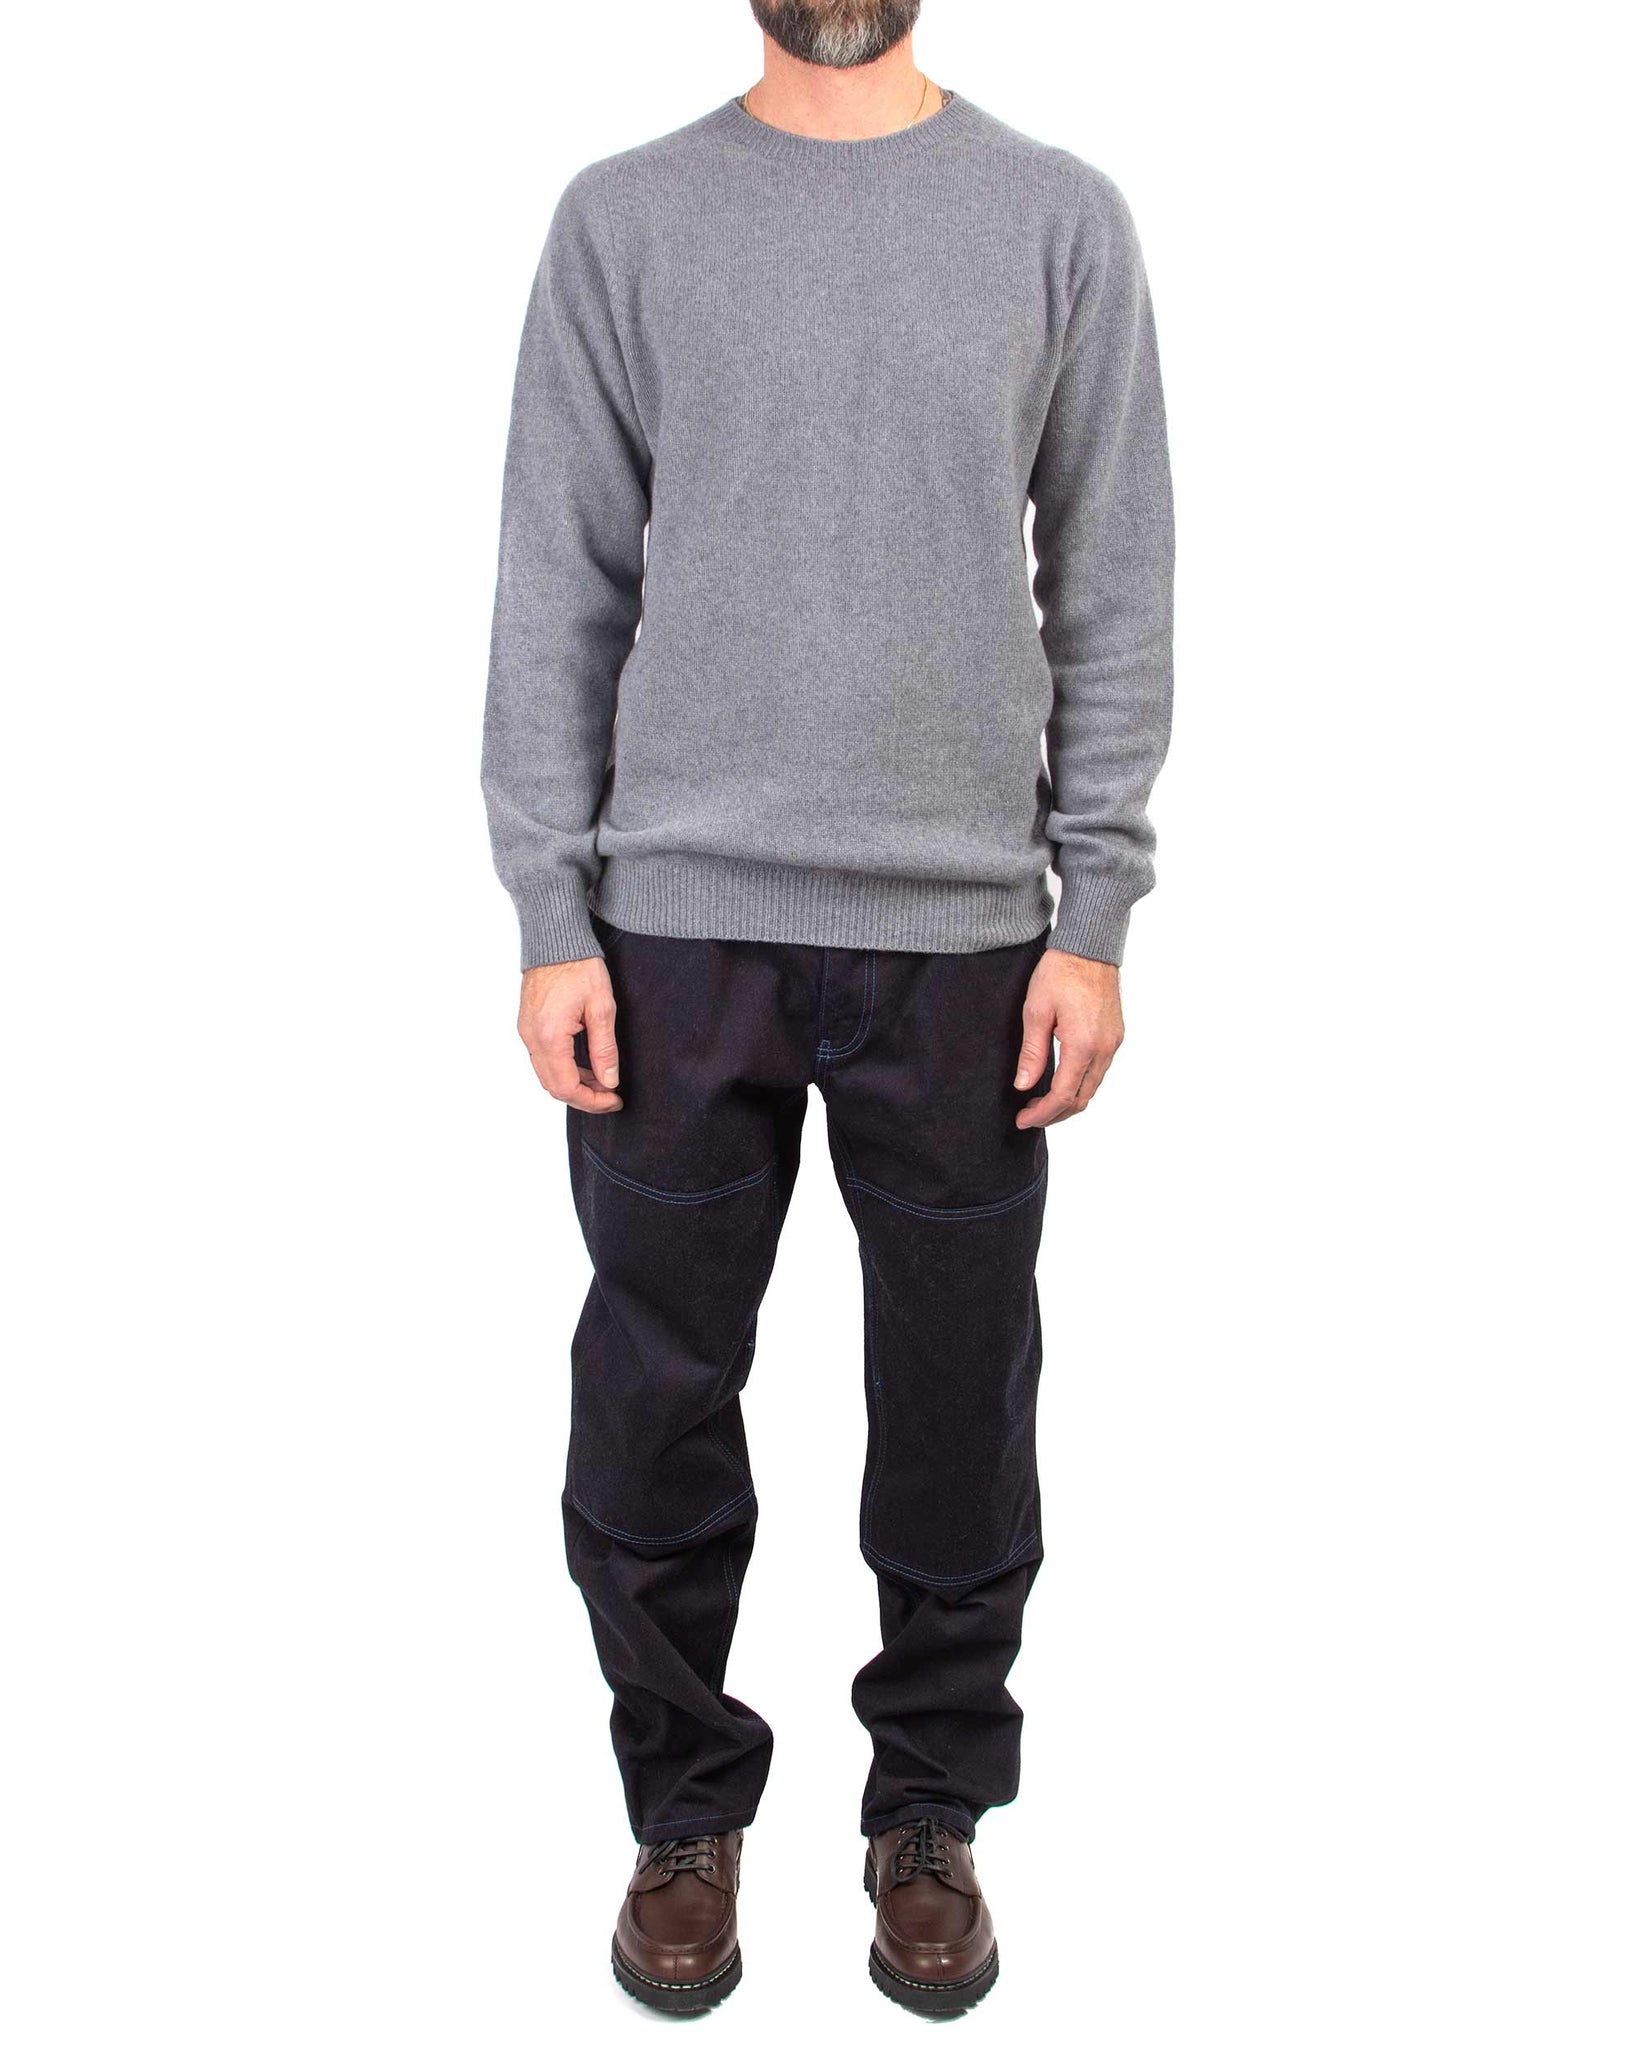 Lost & Found Wool Cashmere Sweater Pew Pew Model